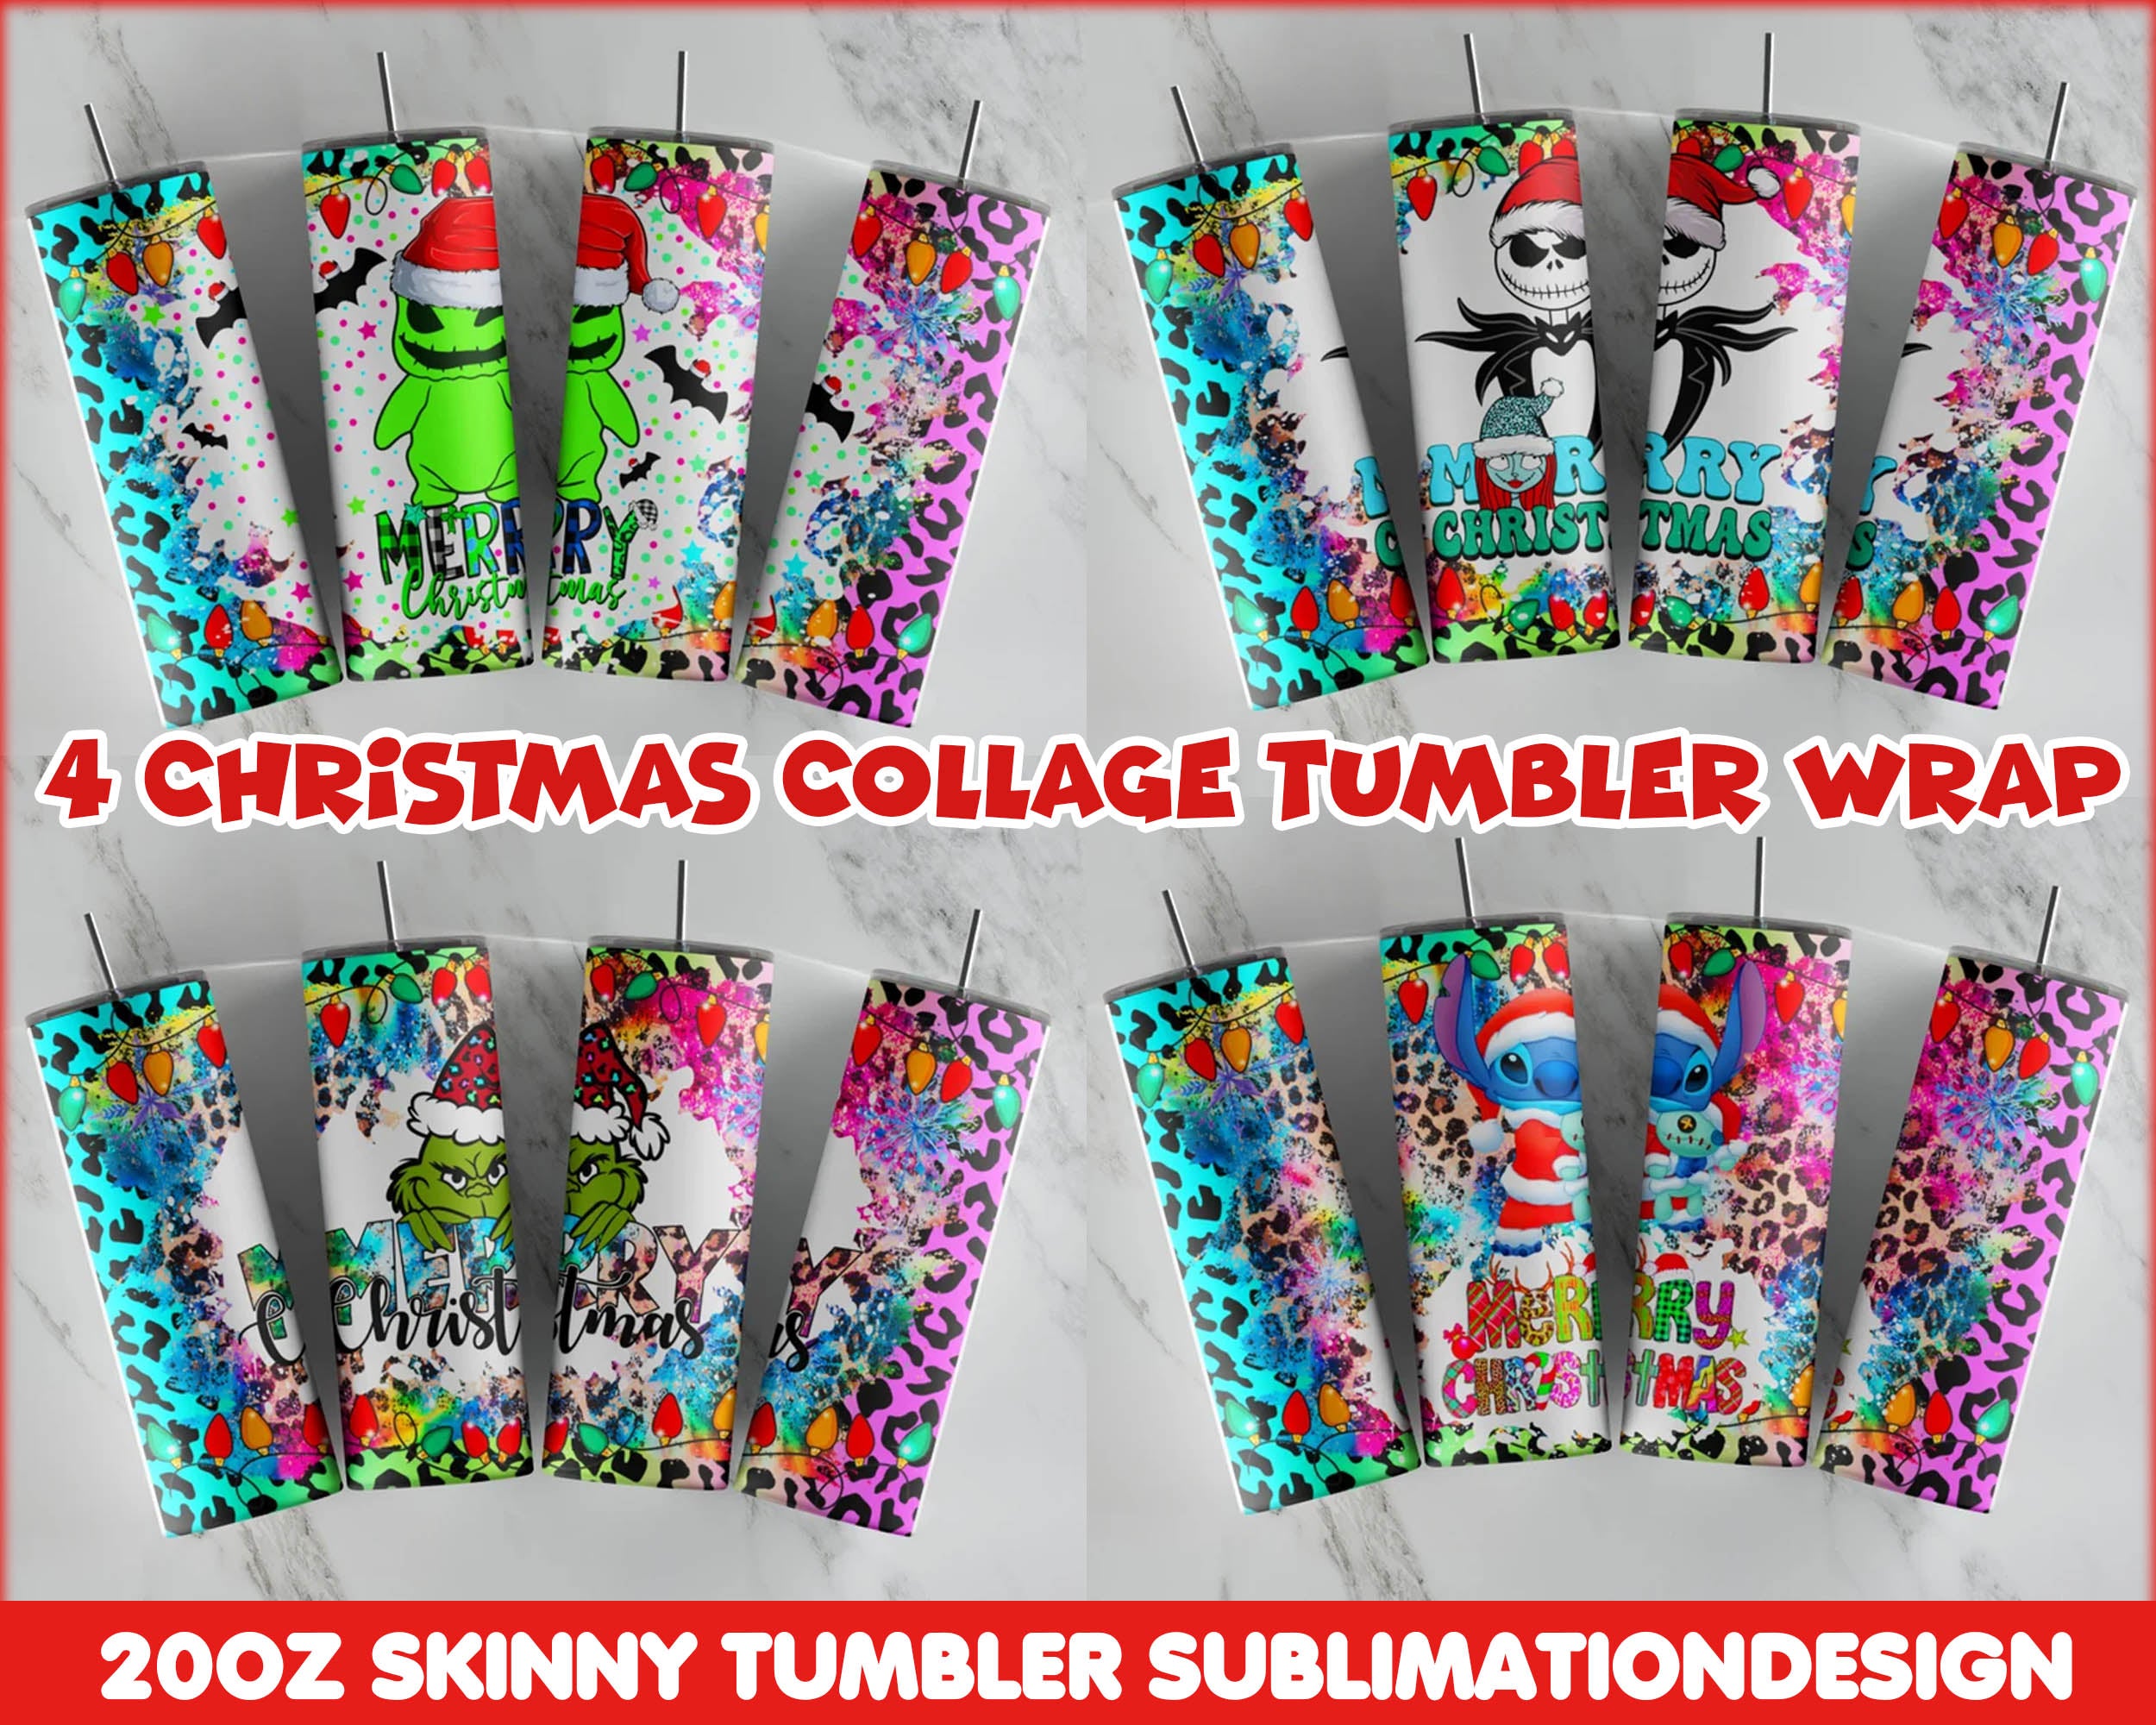 Version 2.0 - 4 Christmas Collage Tumbler, 20oz Skinny Tumbler Sublimation Designs, Christmas Tumbler bundle, PNG, Instant Download  CRM12112201